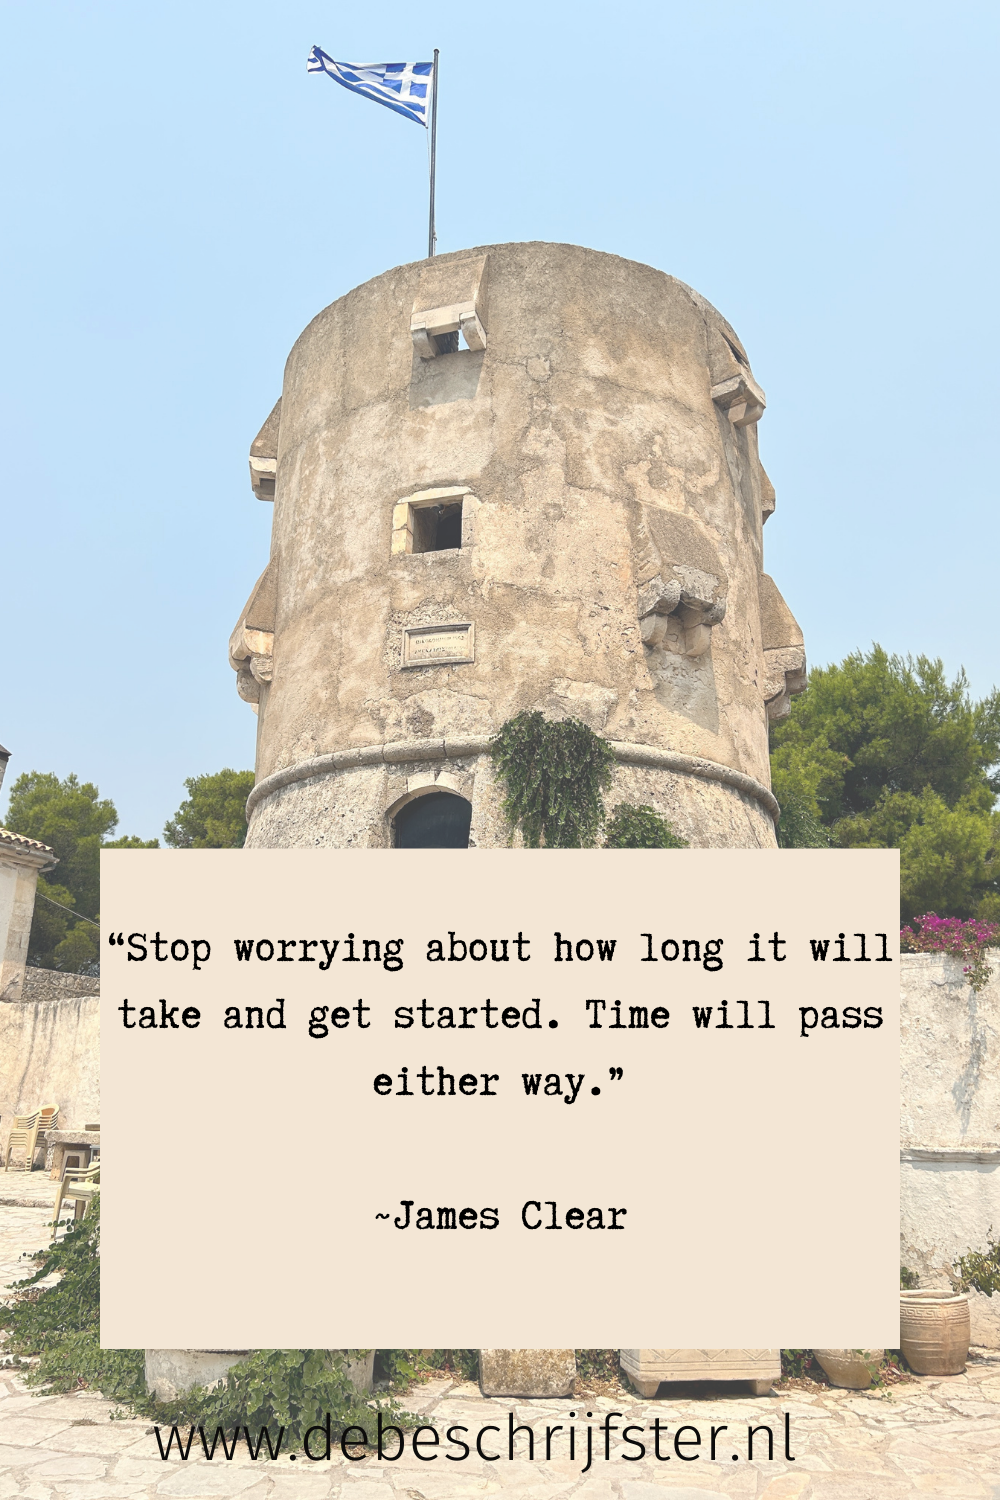 ‘Stop worrying about how long it will take and get started. Time will pass either way.’ James Clear